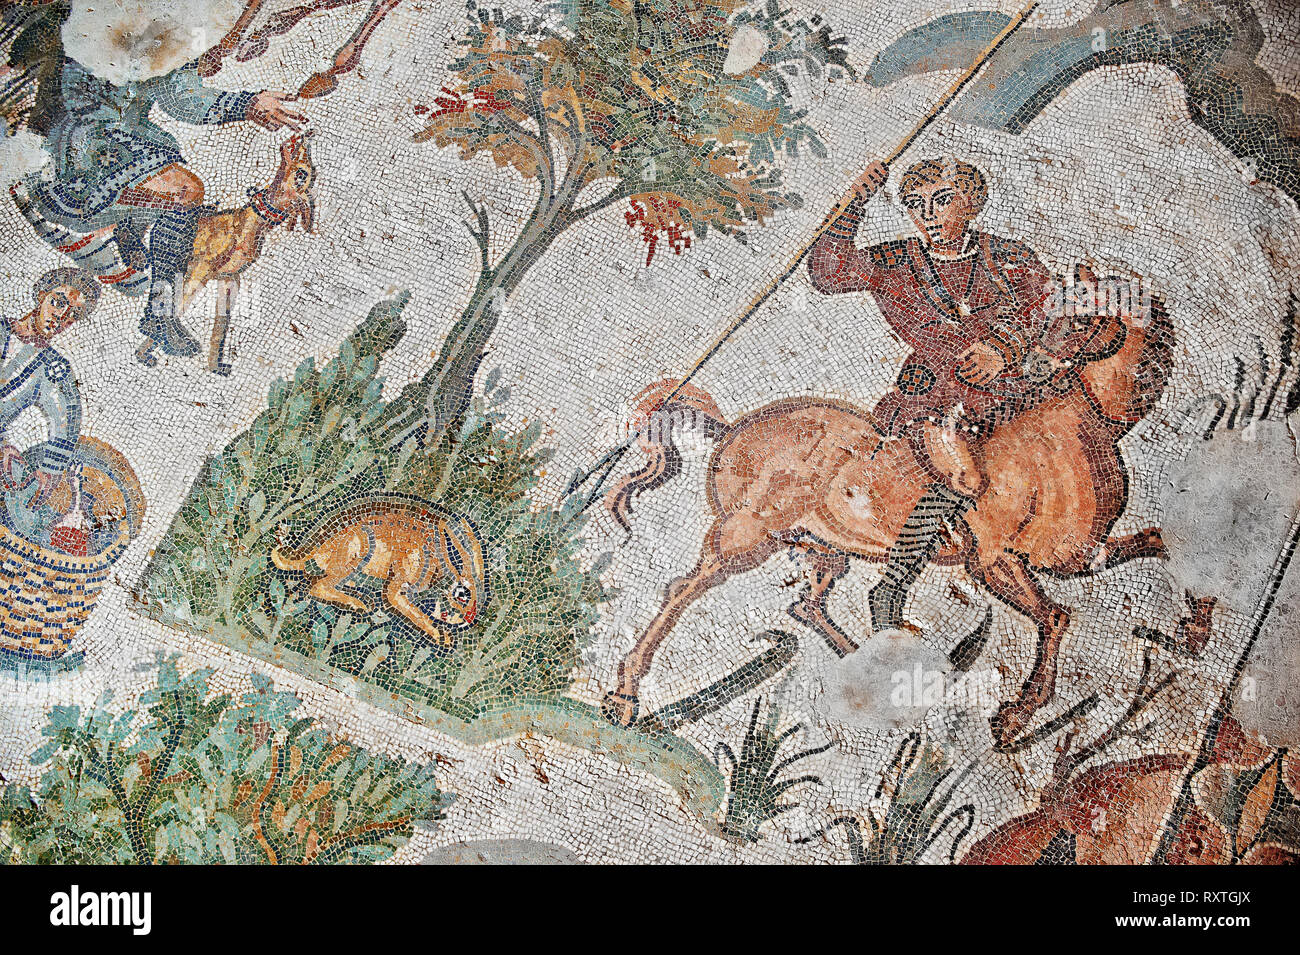 Hunter about to spear a hare From the Room of The Small Hunt, no 25 - Roman mosaics at the Villa Romana del Casale which containis the richest, larges Stock Photo